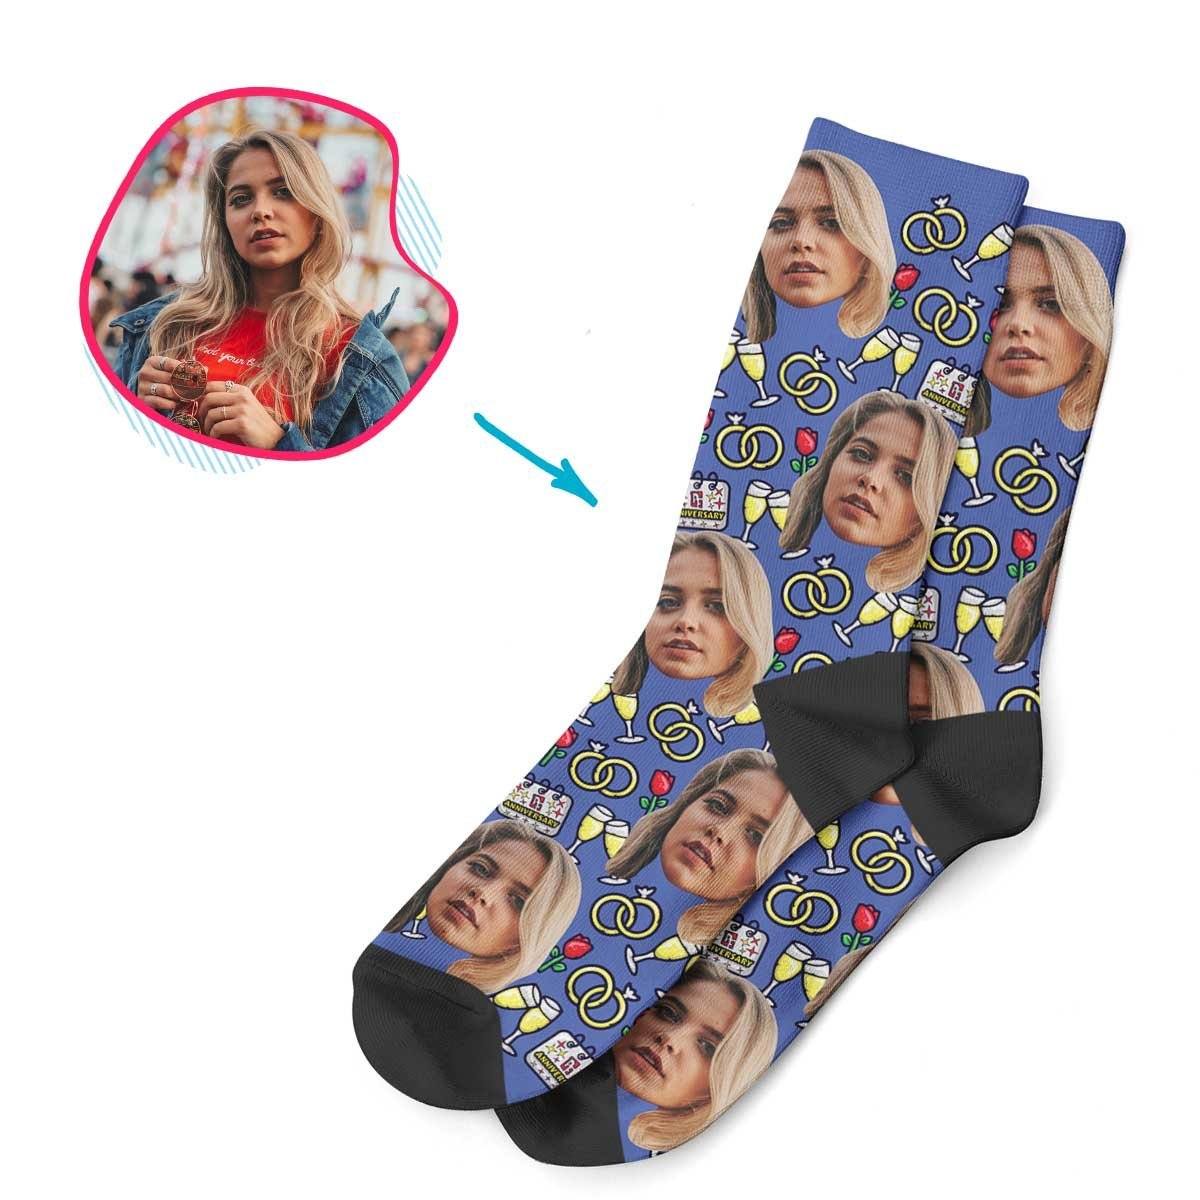 Darkblue Anniversary personalized socks with photo of face printed on them